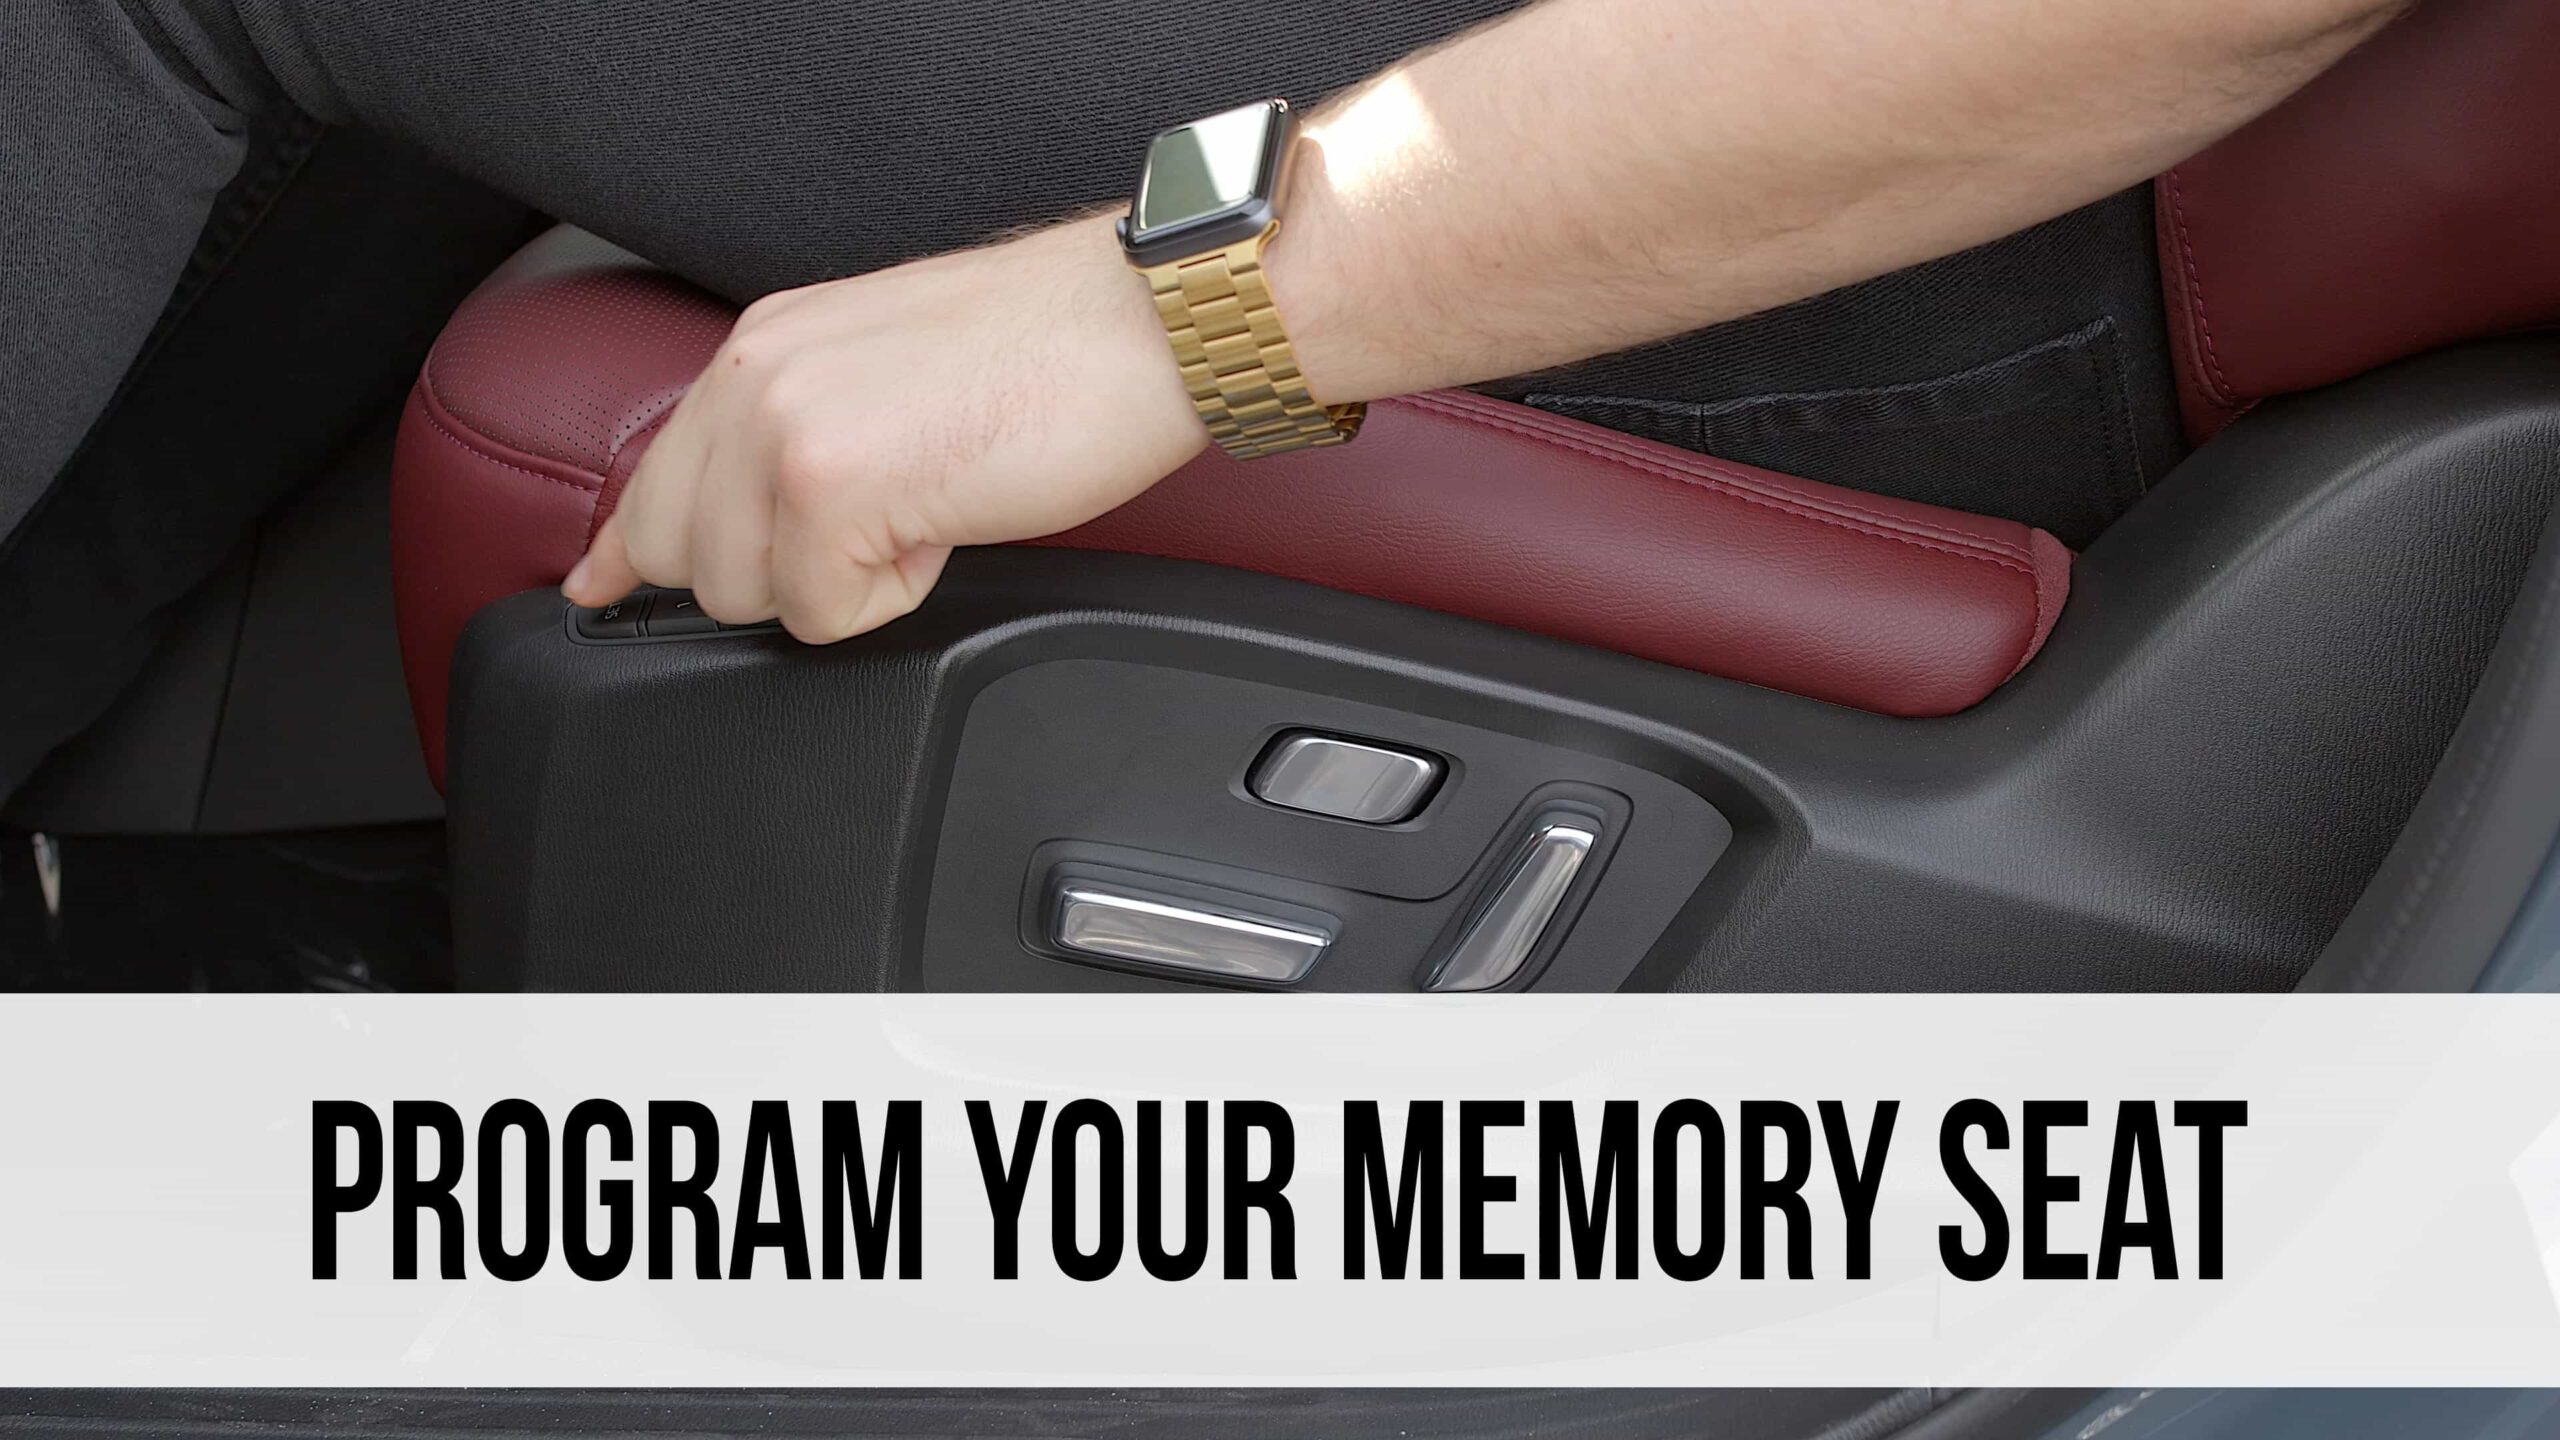 How to program your memory seat